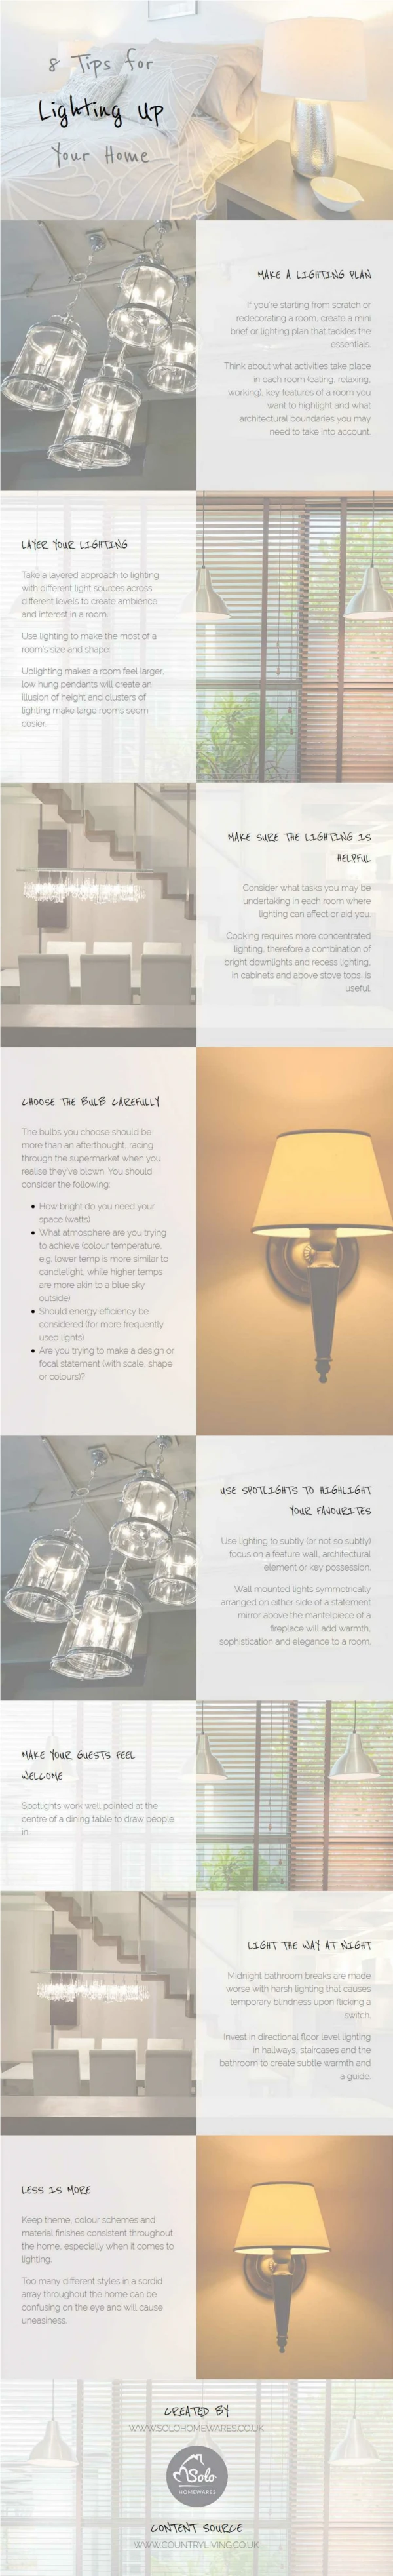 8 Tips for Lighting Up Your Home